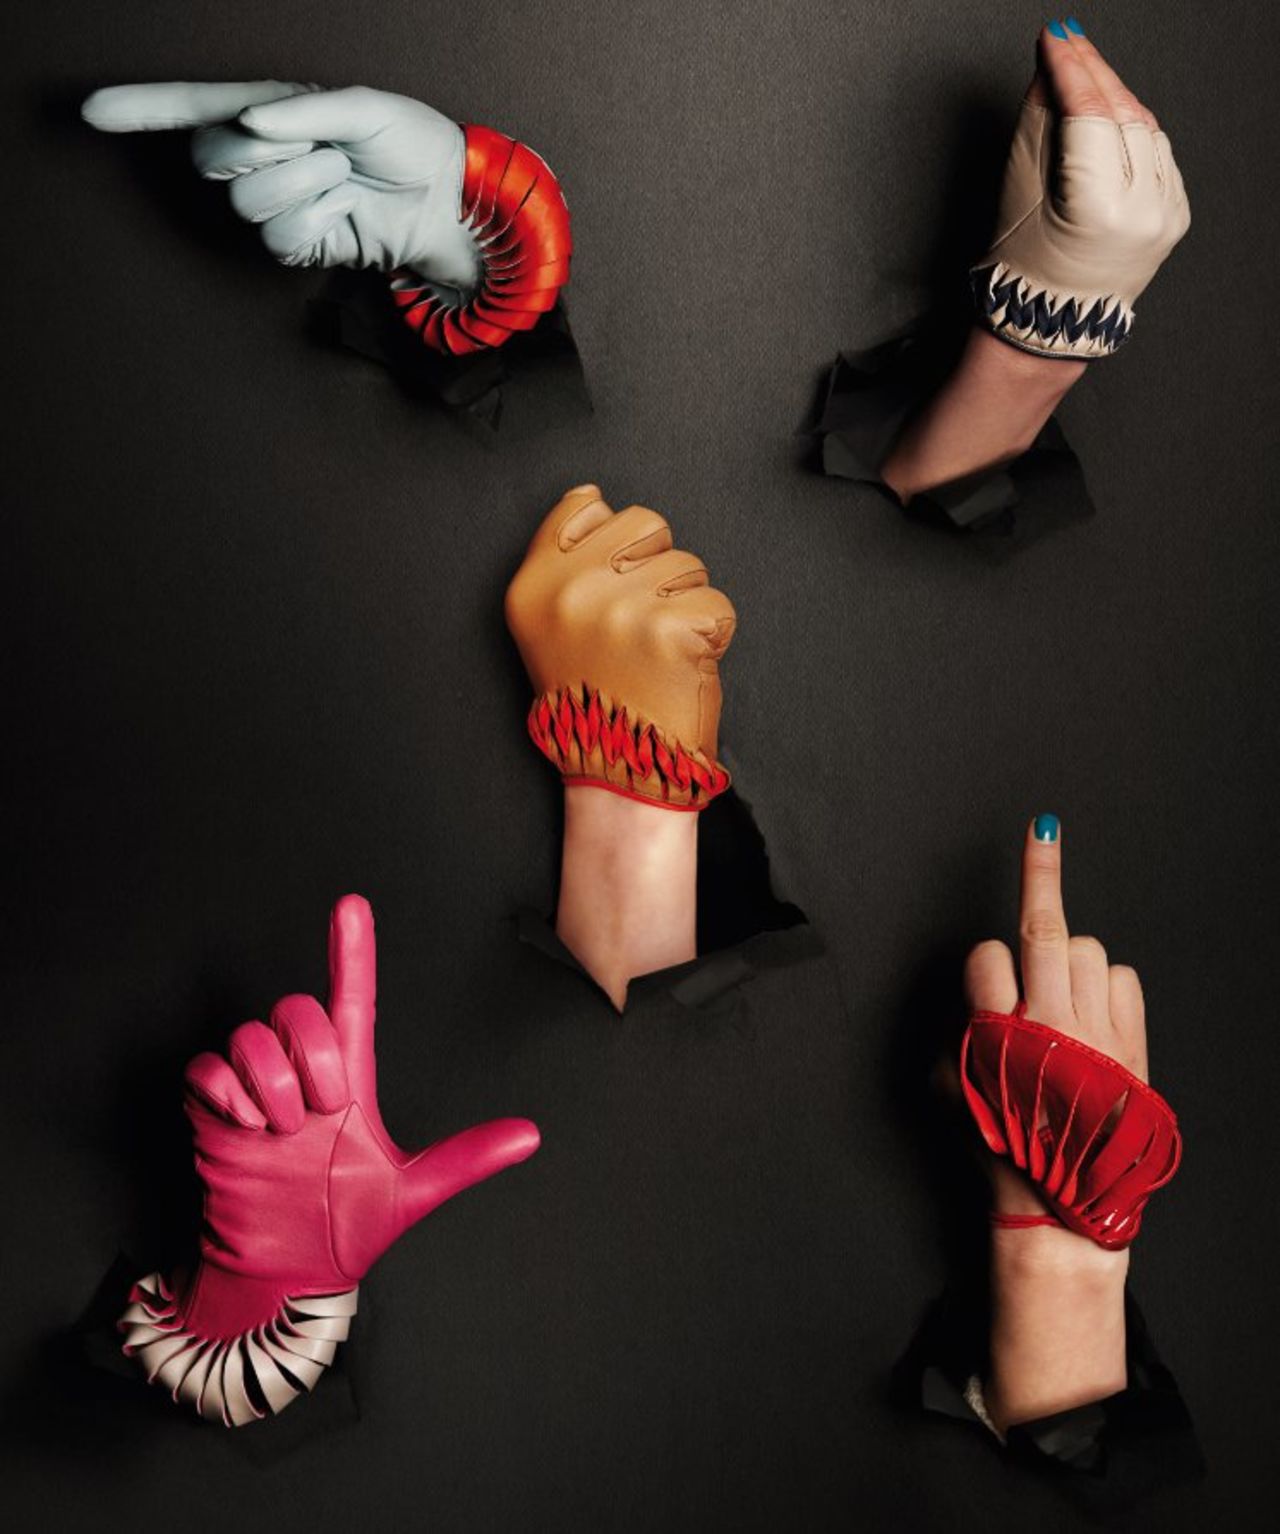 Barnekow designs her gloves in materials such as leather from Icelandic salmon or hand-painted python.